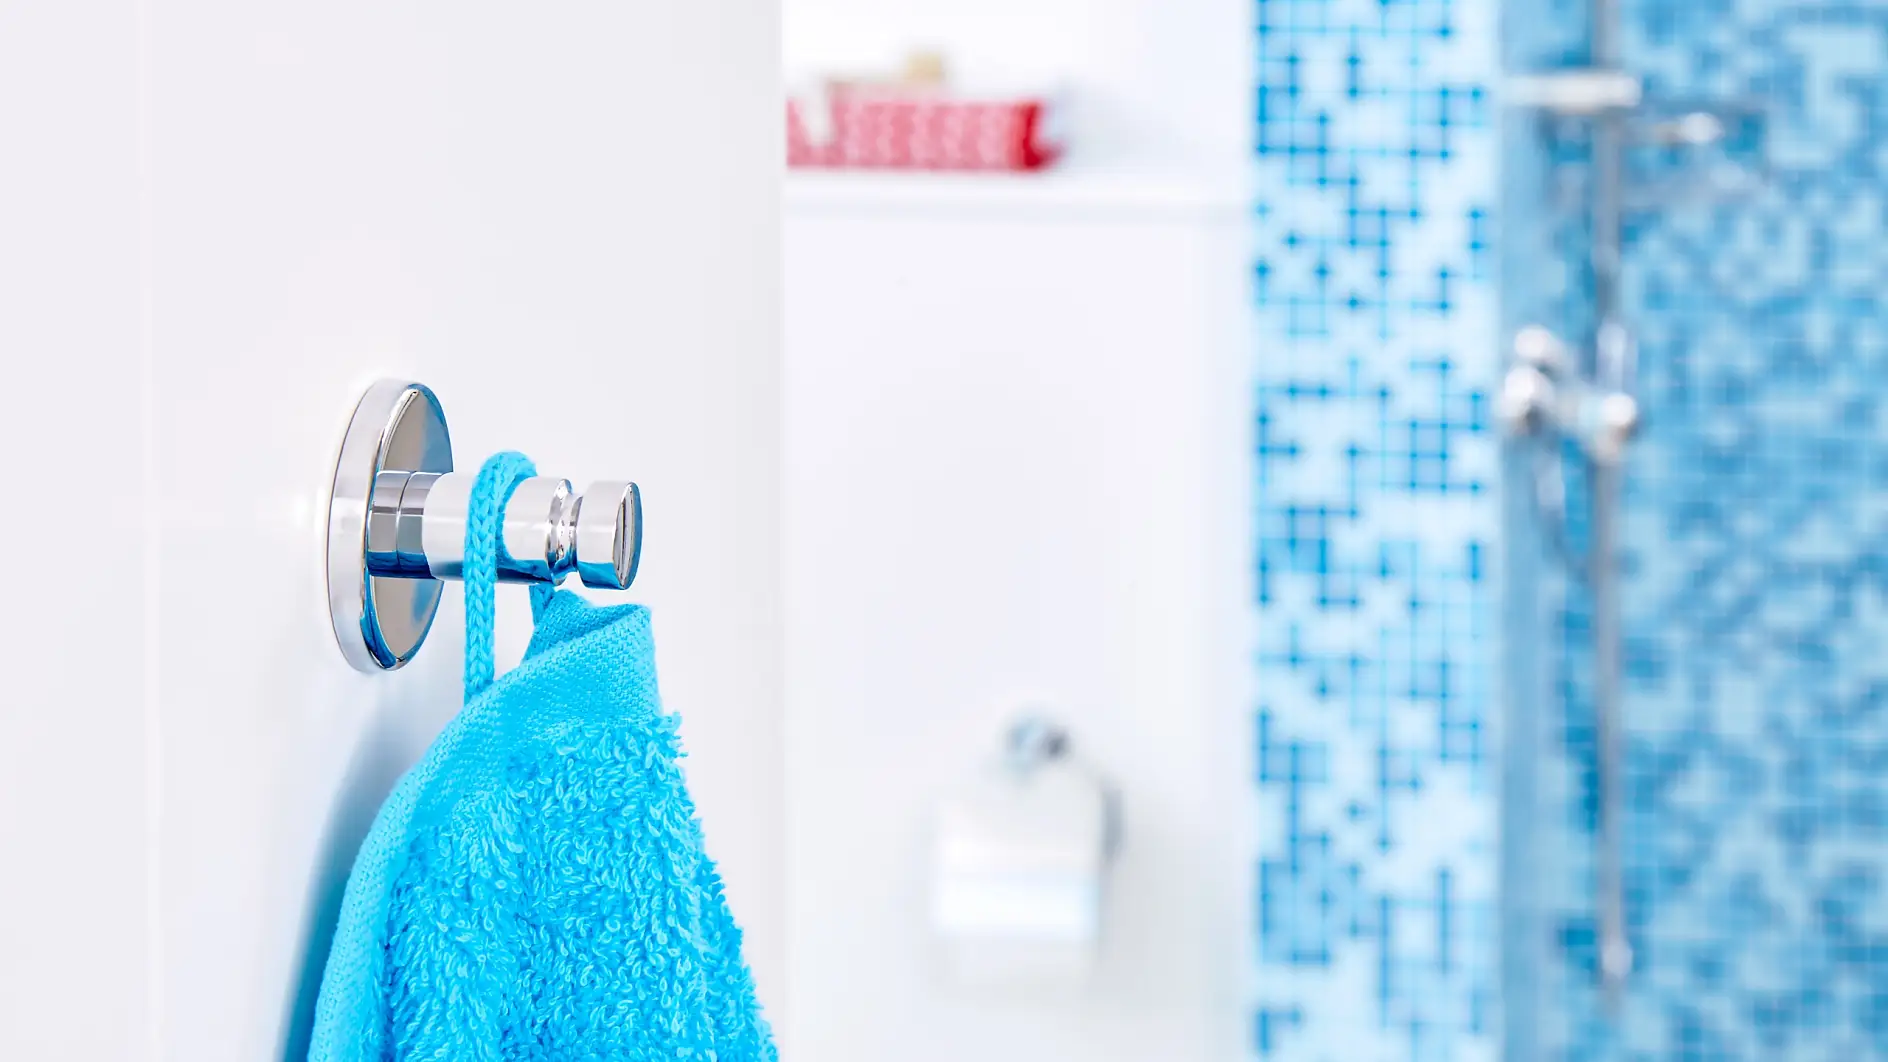 Every towel needs a hook to be close to where it is used. Get the one that matches your bathroom's style.